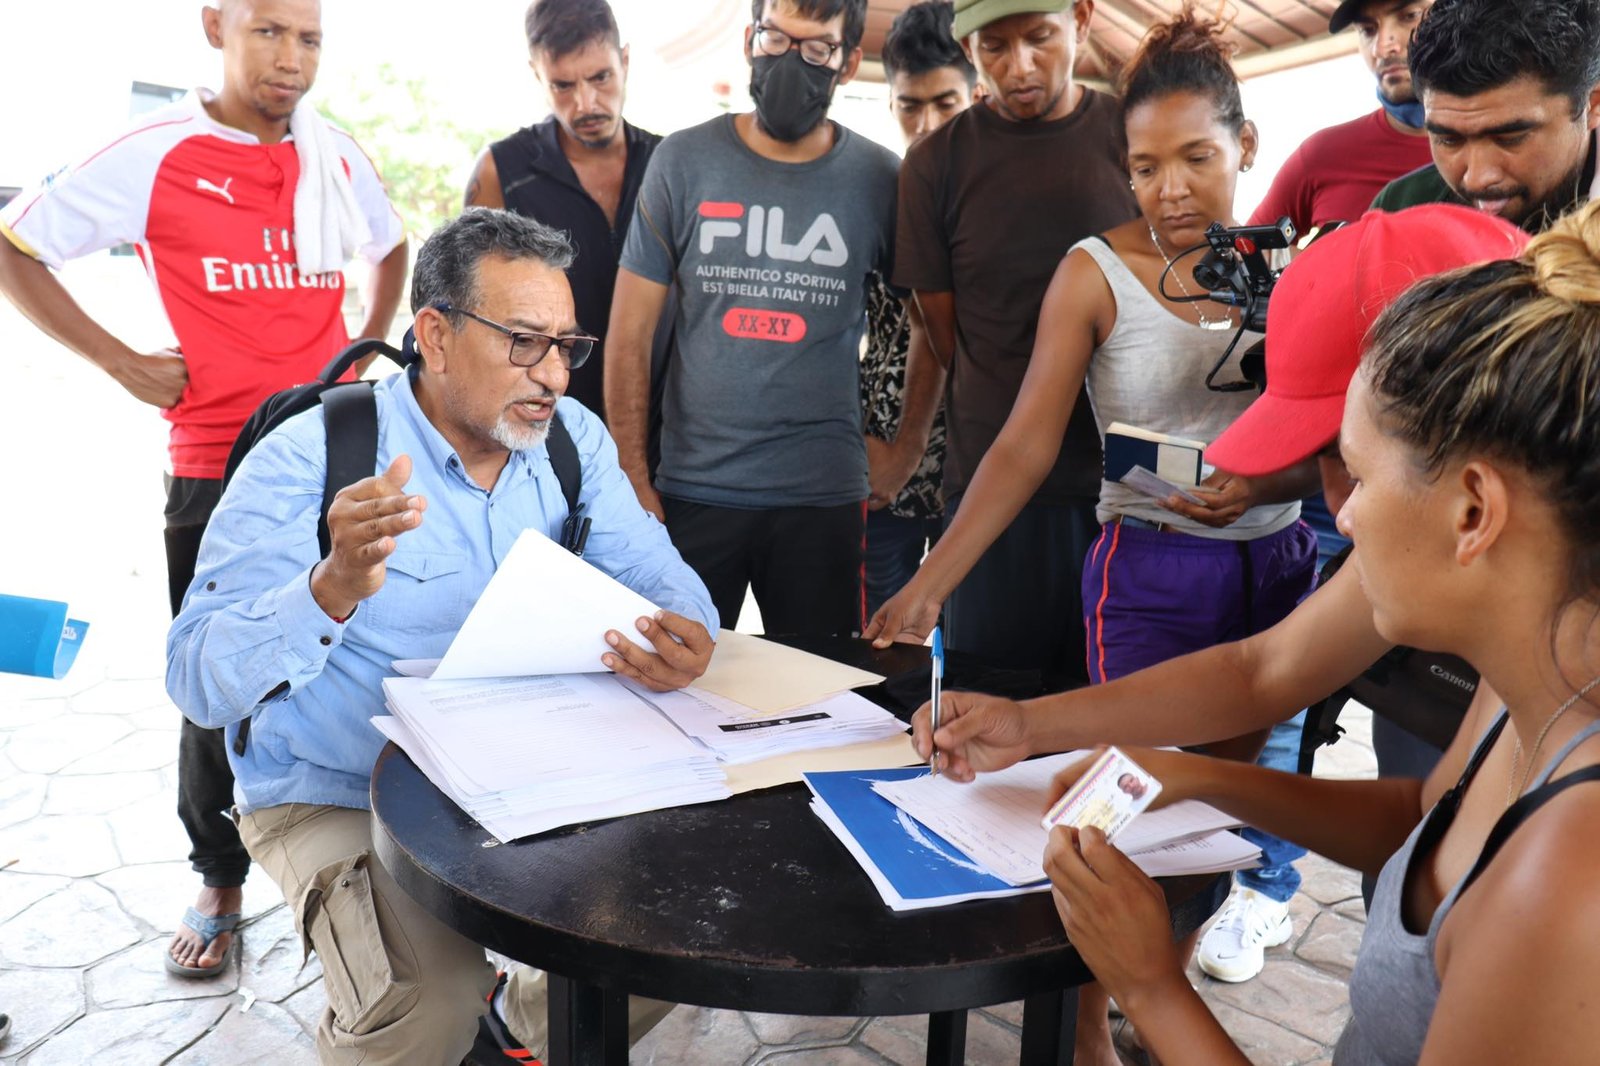 “A Migrant Way of the Cross is being prepared in Tapachula”